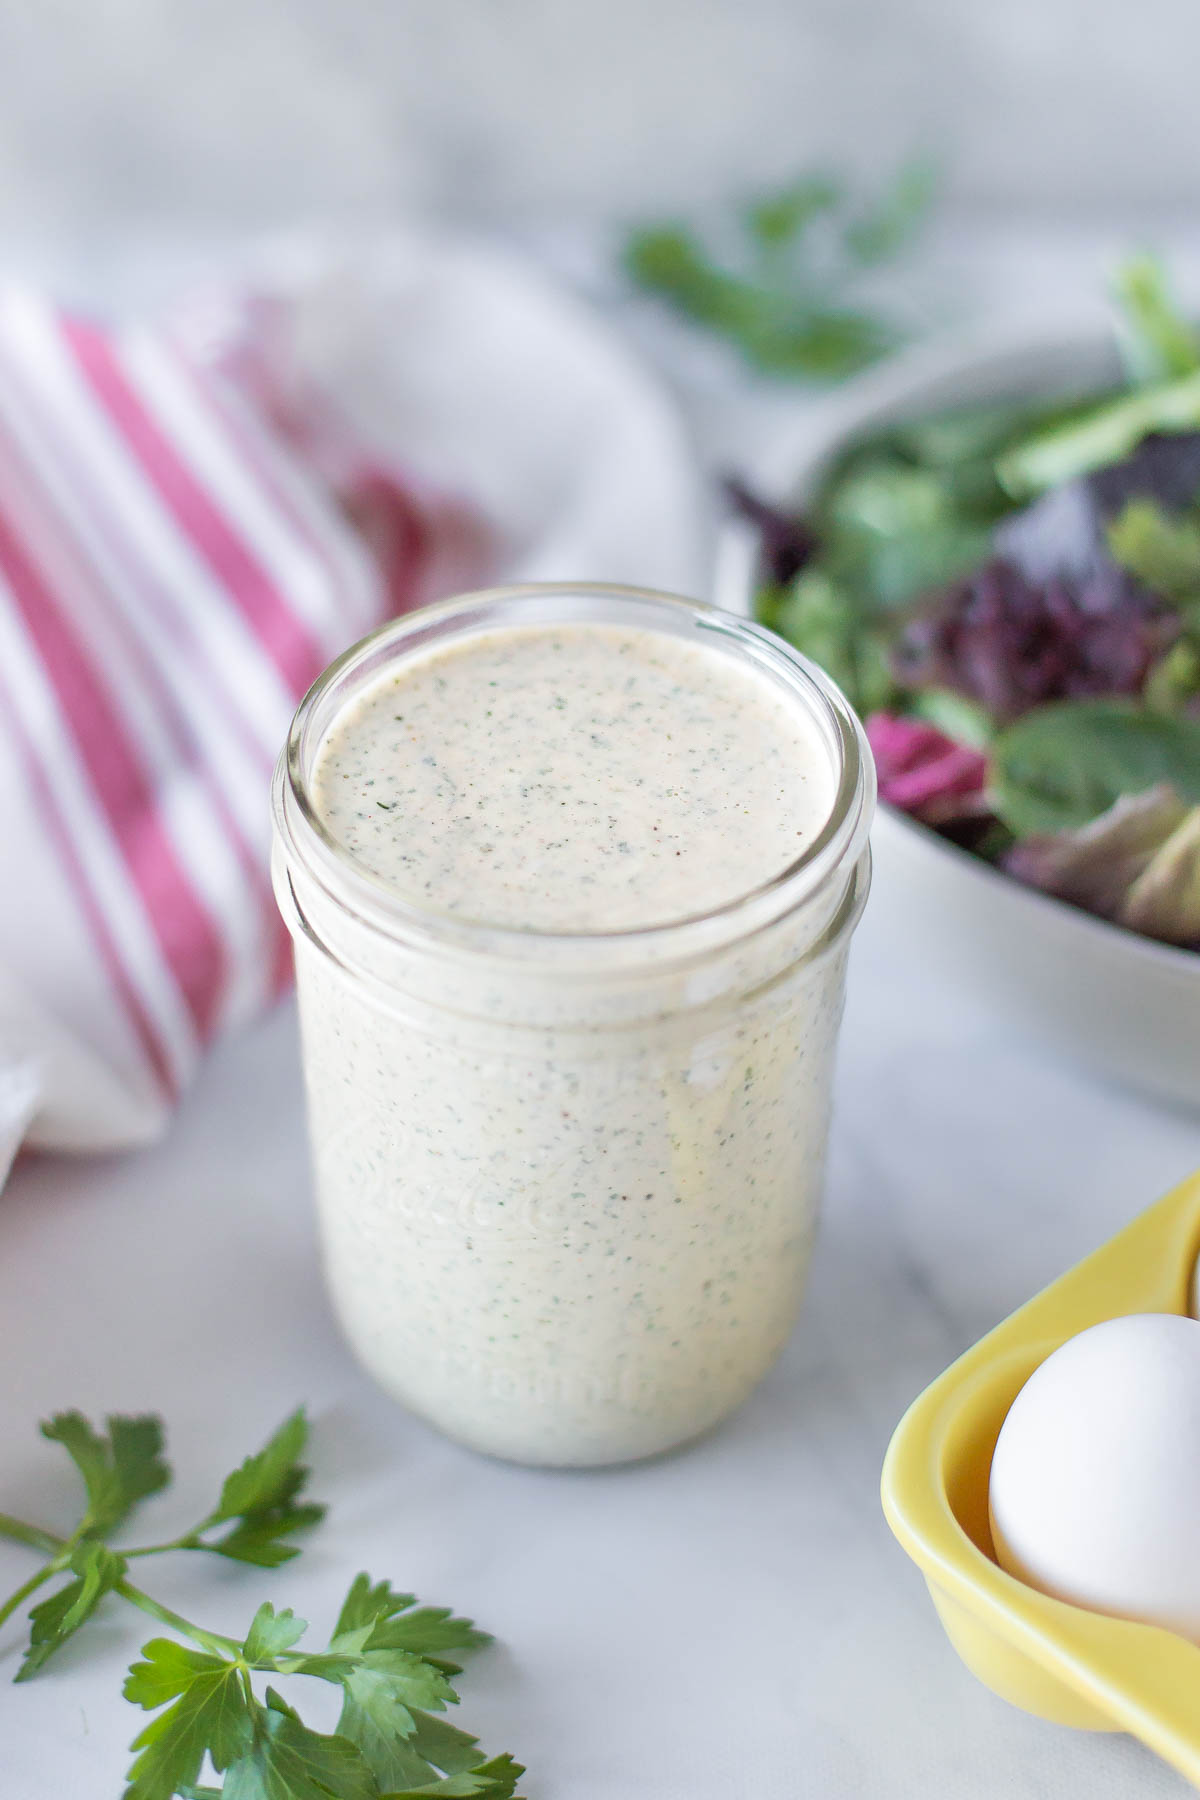 A jar of The BEST Dairy Free Ranch Dressing